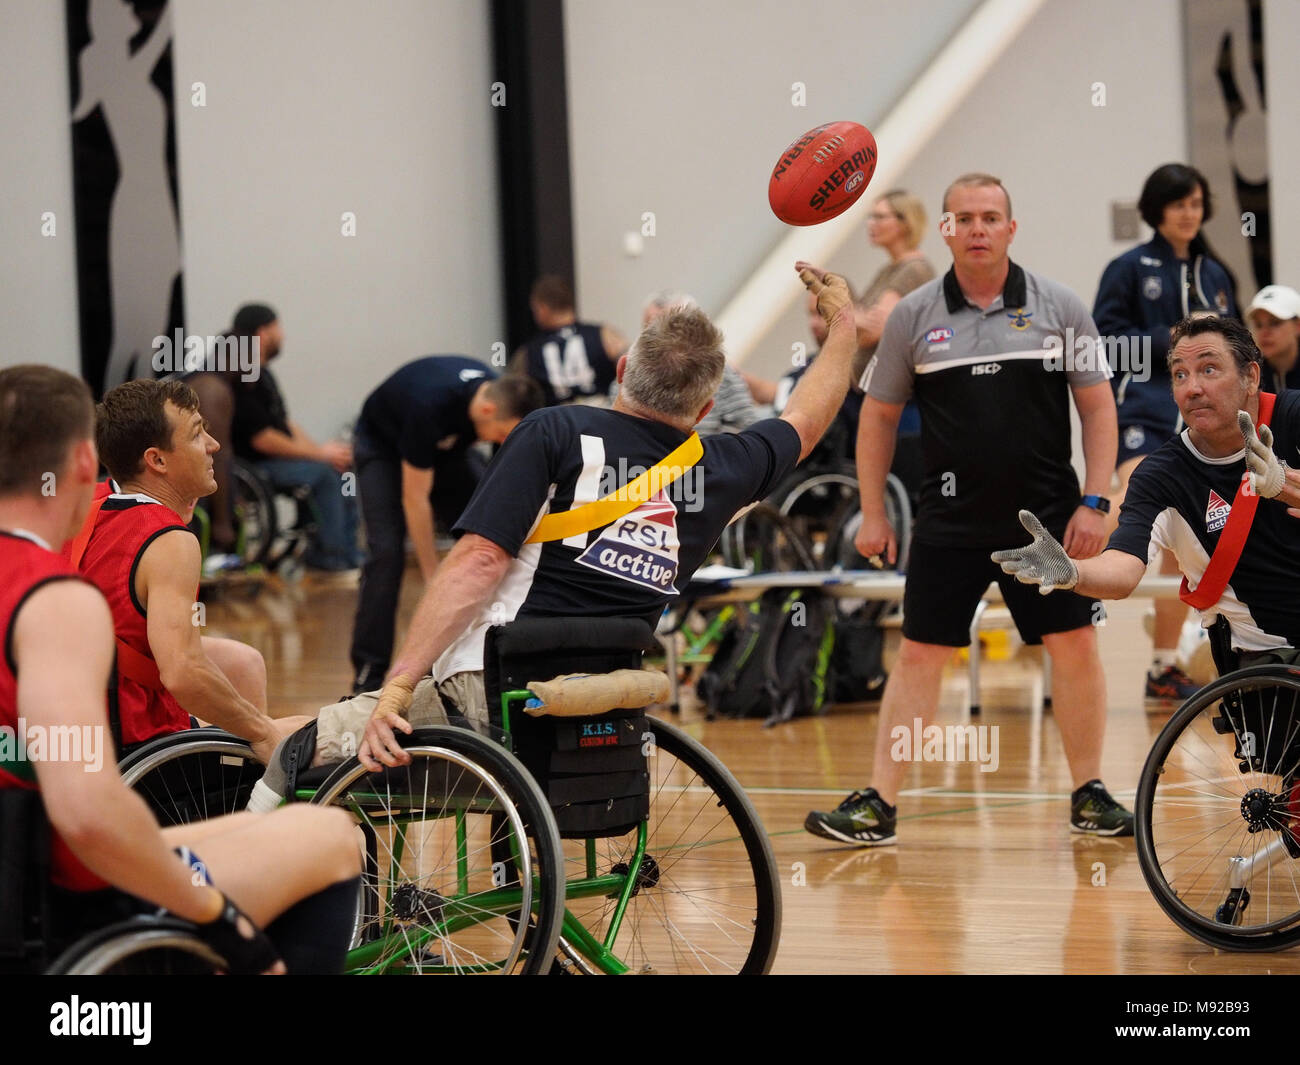 Melbourne, Australia. 22nd March 2018. 2018 Wheelchair Aussie Rules National Championship. RSL Active vs Defence Force 1. Credit Bill Forrester/Alamy Live News Stock Photo